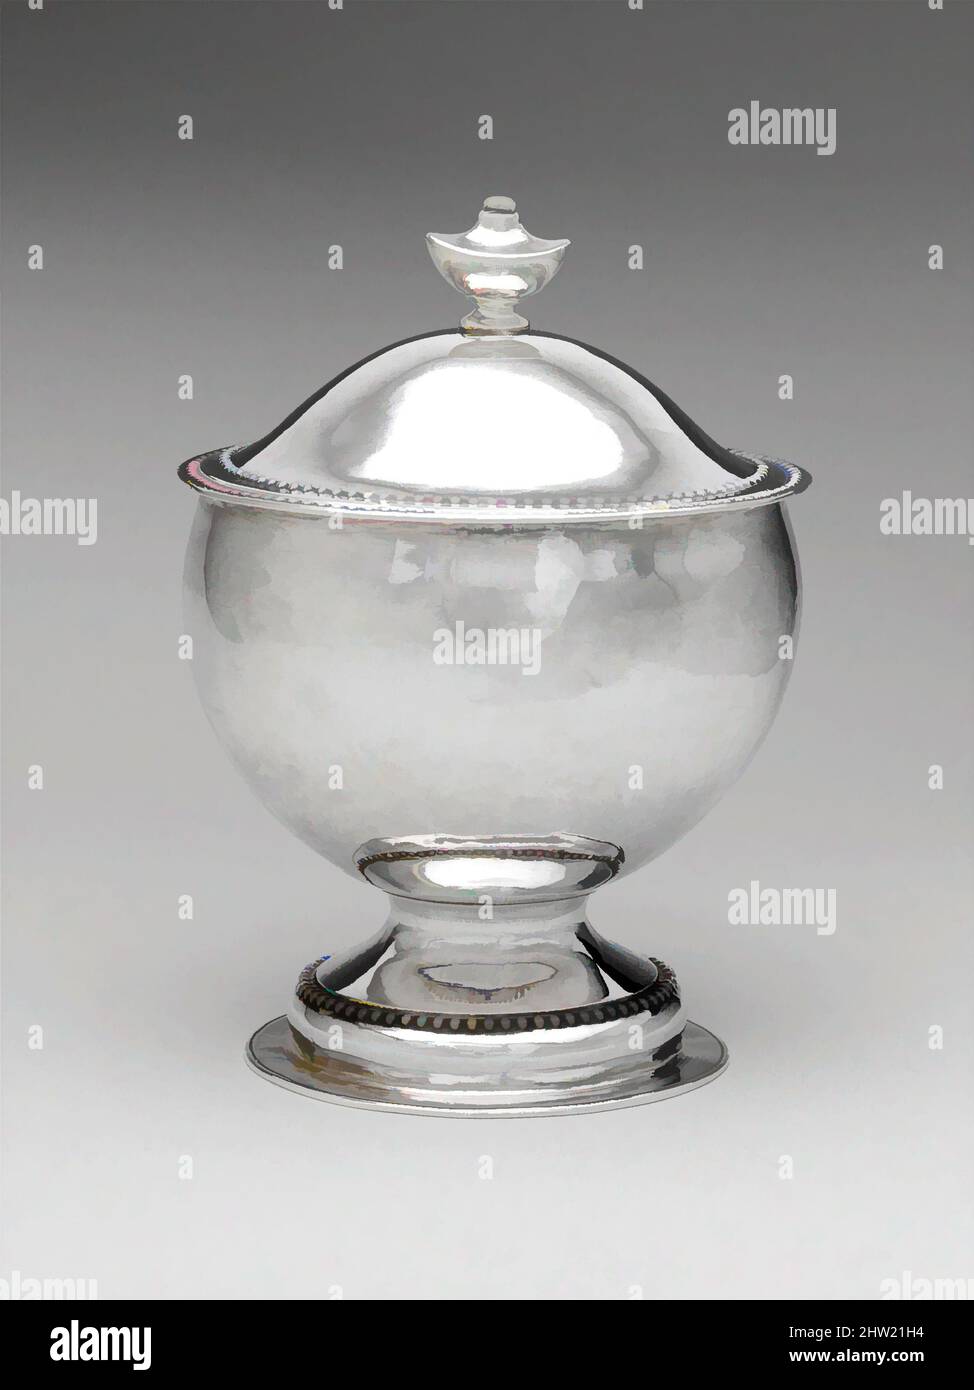 Art inspired by Sugar Bowl, ca. 1795, Made in Providence, Rhode Island, United States, American, Silver, Overall: 6 5/8 x 4 13/16 in. (16.8 x 12.2 cm); 16 oz. (497.1 g), Silver, David Vinton (1774–1833, Classic works modernized by Artotop with a splash of modernity. Shapes, color and value, eye-catching visual impact on art. Emotions through freedom of artworks in a contemporary way. A timeless message pursuing a wildly creative new direction. Artists turning to the digital medium and creating the Artotop NFT Stock Photo